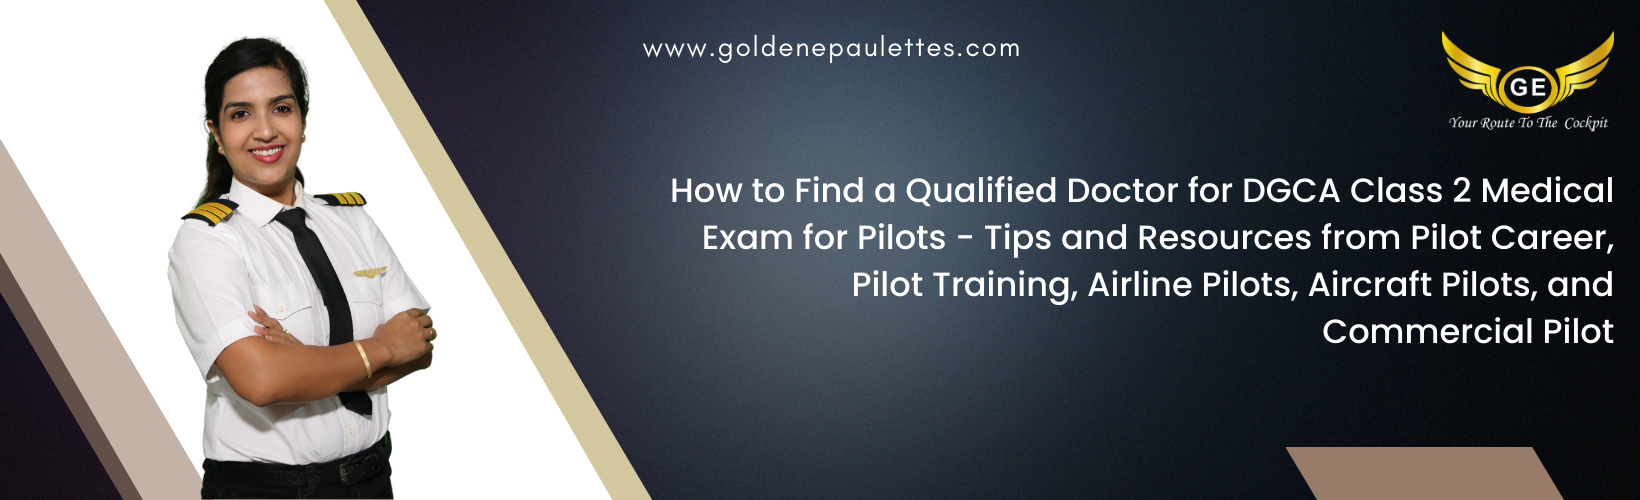 How to Find a Qualified Doctor for a DGCA Class 2 Medical Exam for Pilots - This article will provide tips on how to find a qualified doctor to administer the DGCA Class 2 Medical Exam for Pilots. It will discuss the importance of researching potential doctors before making the appointment. (Reference